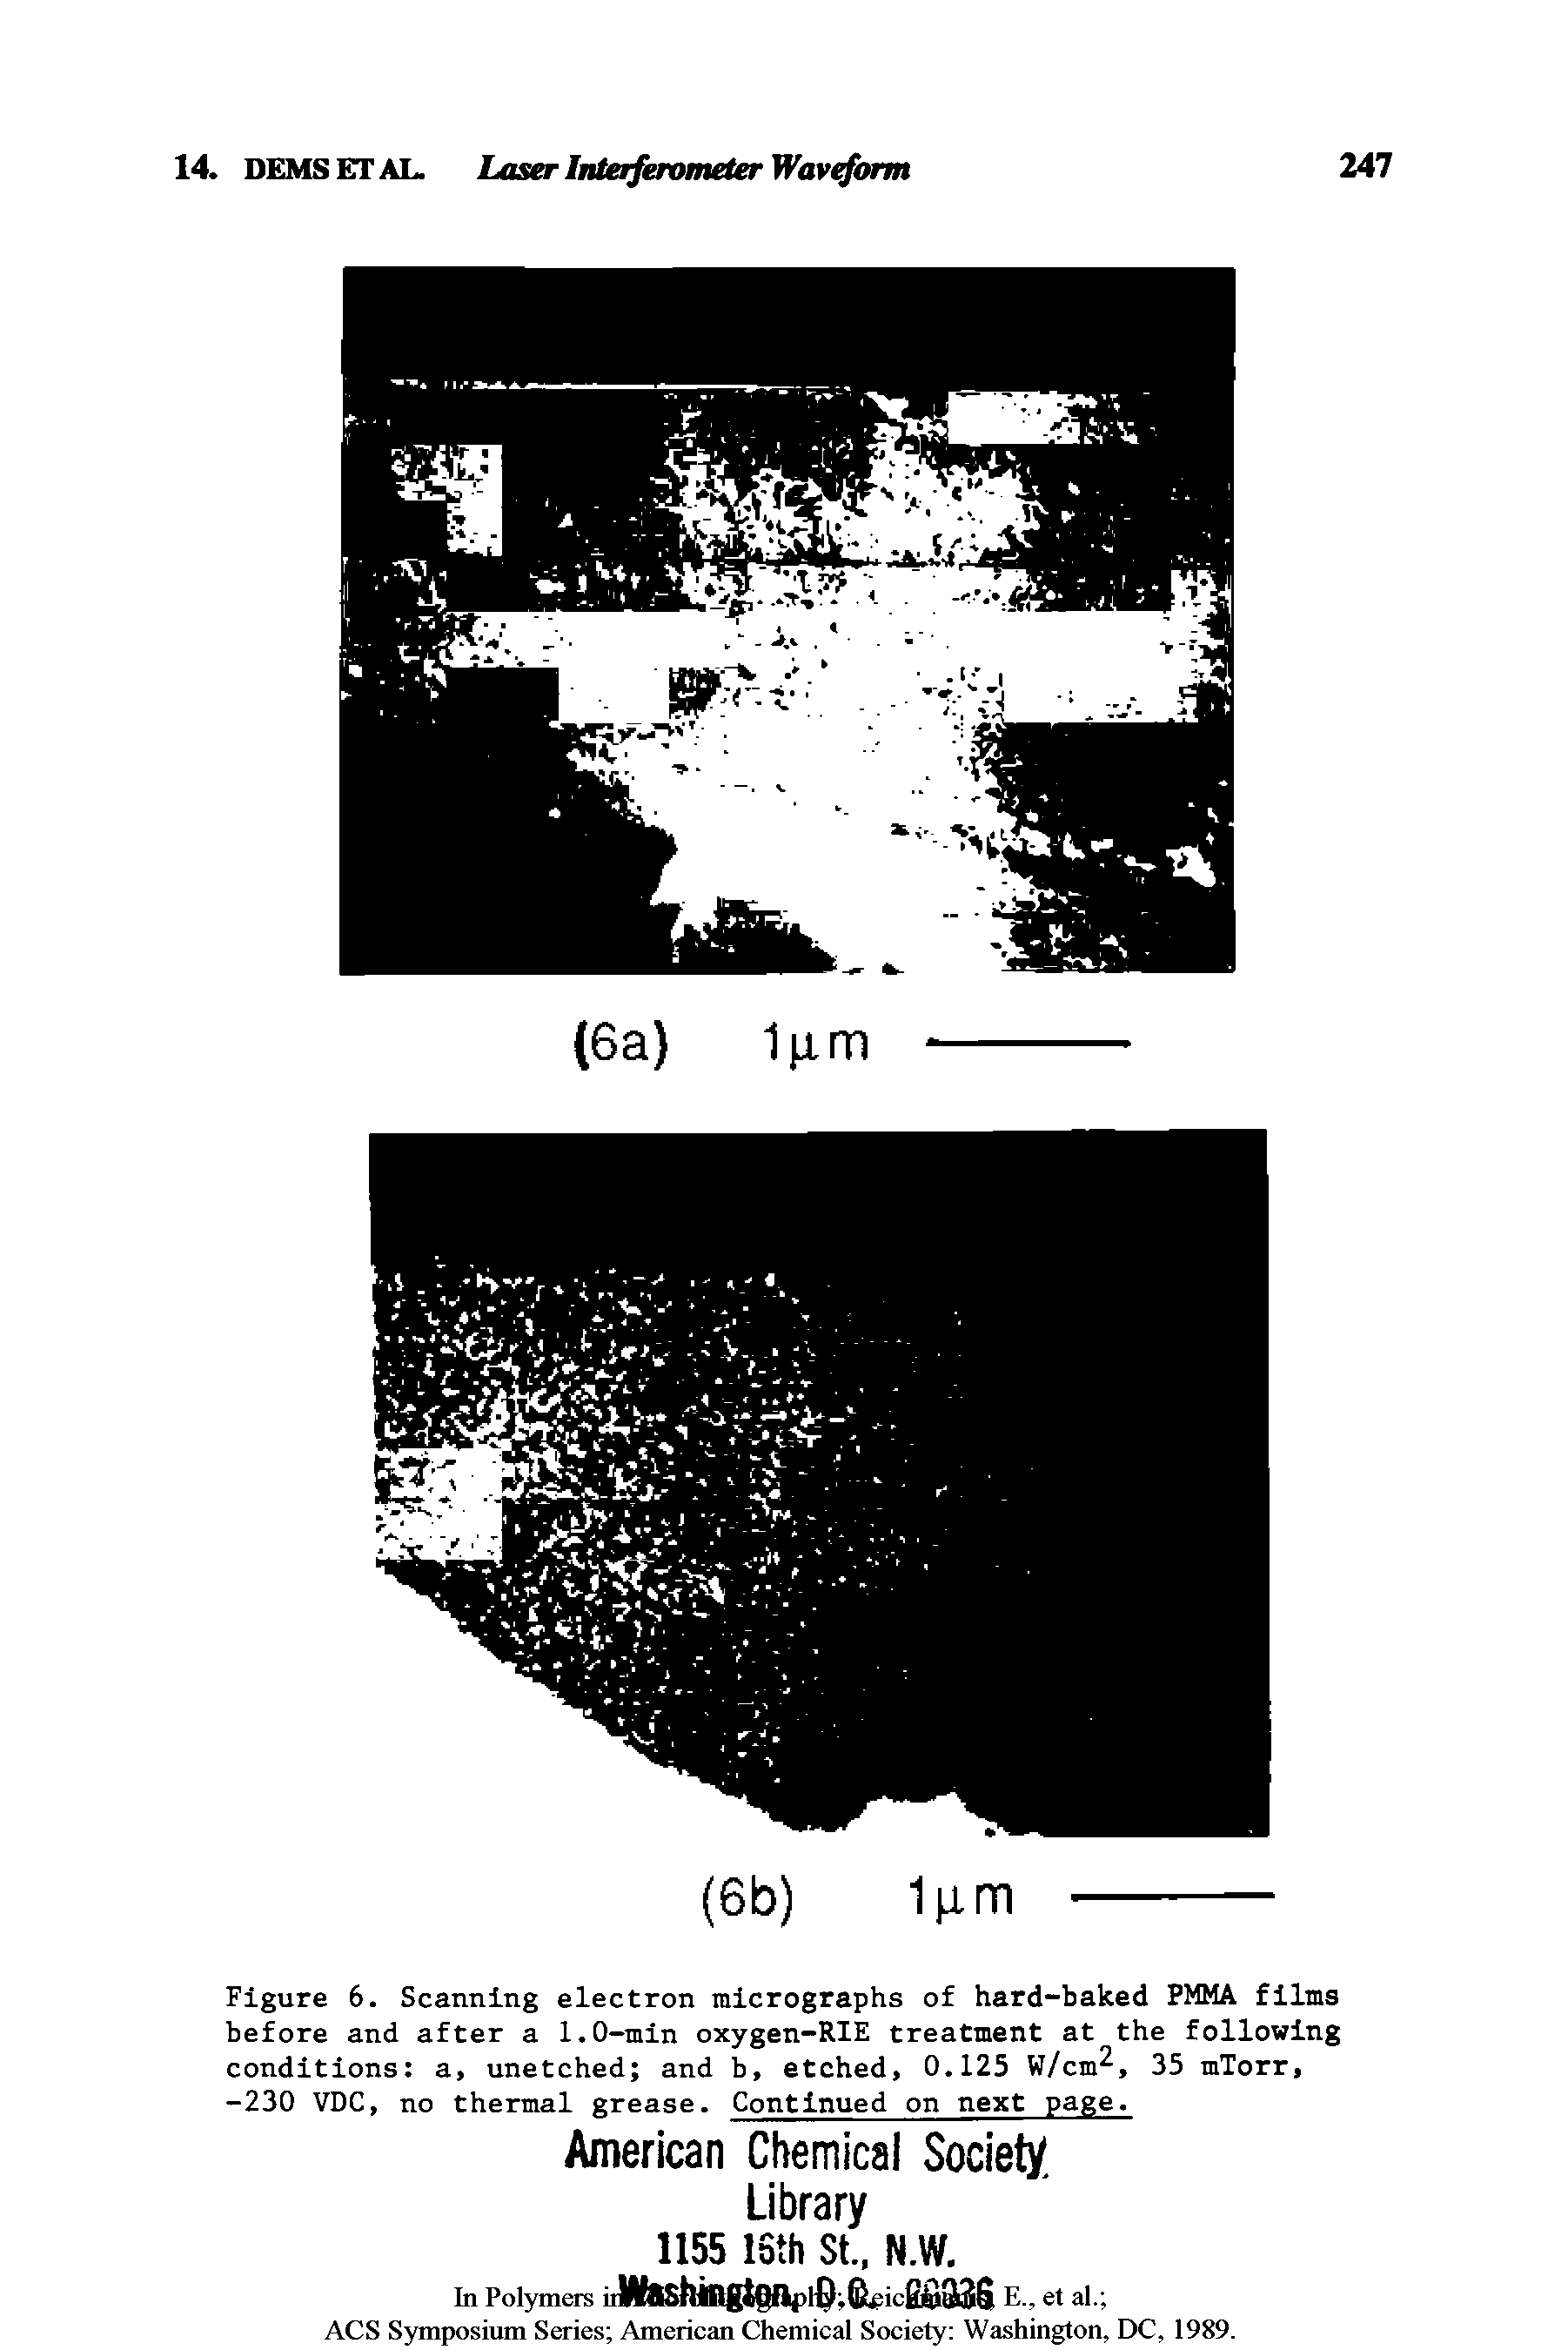 Figure 6. Scanning electron micrographs of hard-baked PMMA films before and after a 1.0-min oxygen-RIE treatment at the following conditions a, unetched and b, etched, 0.125 W/cm, 35 mTorr, -230 VDC, no thermal grease. Continued on next page.